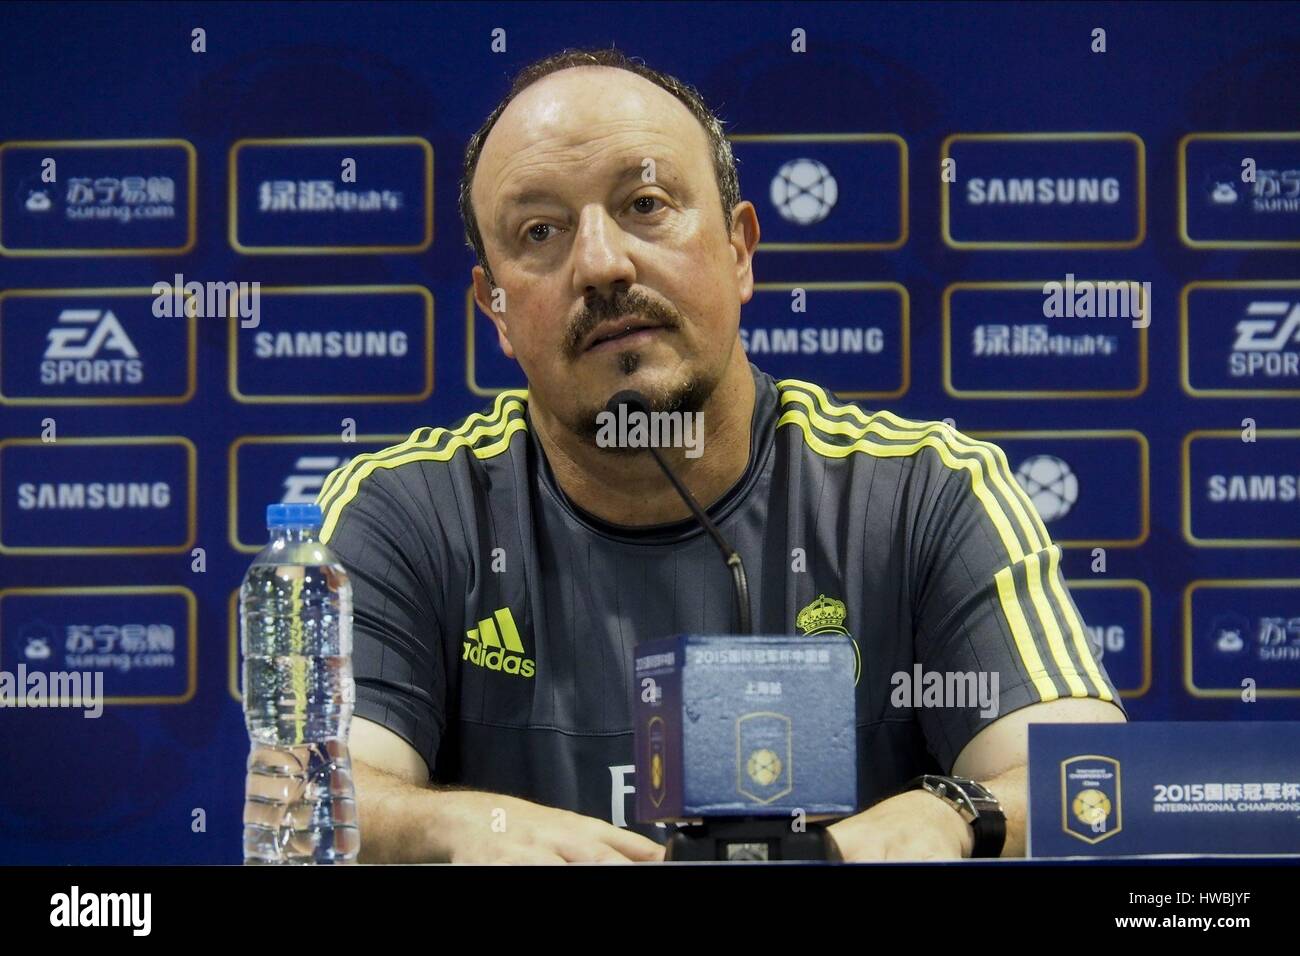 Rafael Benitez Real Madrid (Uk Use Only) 28 July 2015 International Champions Cup Football Match Between Ac Milan And Real Madrid On July 29, 2015 In Shanghai, China. 28 July 2015 Gaw90227 Sportsphoto Ltd/Allstar Warning! This Photograph May Only Be Used For Newspaper And/Or Magazine Editorial Purposes. May Not Be Used For Publications Involving 1 Player, 1 Club Or 1 Competition Without Written Authorisation From Football Data Co Ltd. For Any Queries, Please Contact Football Data Co Ltd On  44 (0) 207 864 9121 Credit: Allstar Picture Library/Alamy Live News Stock Photo